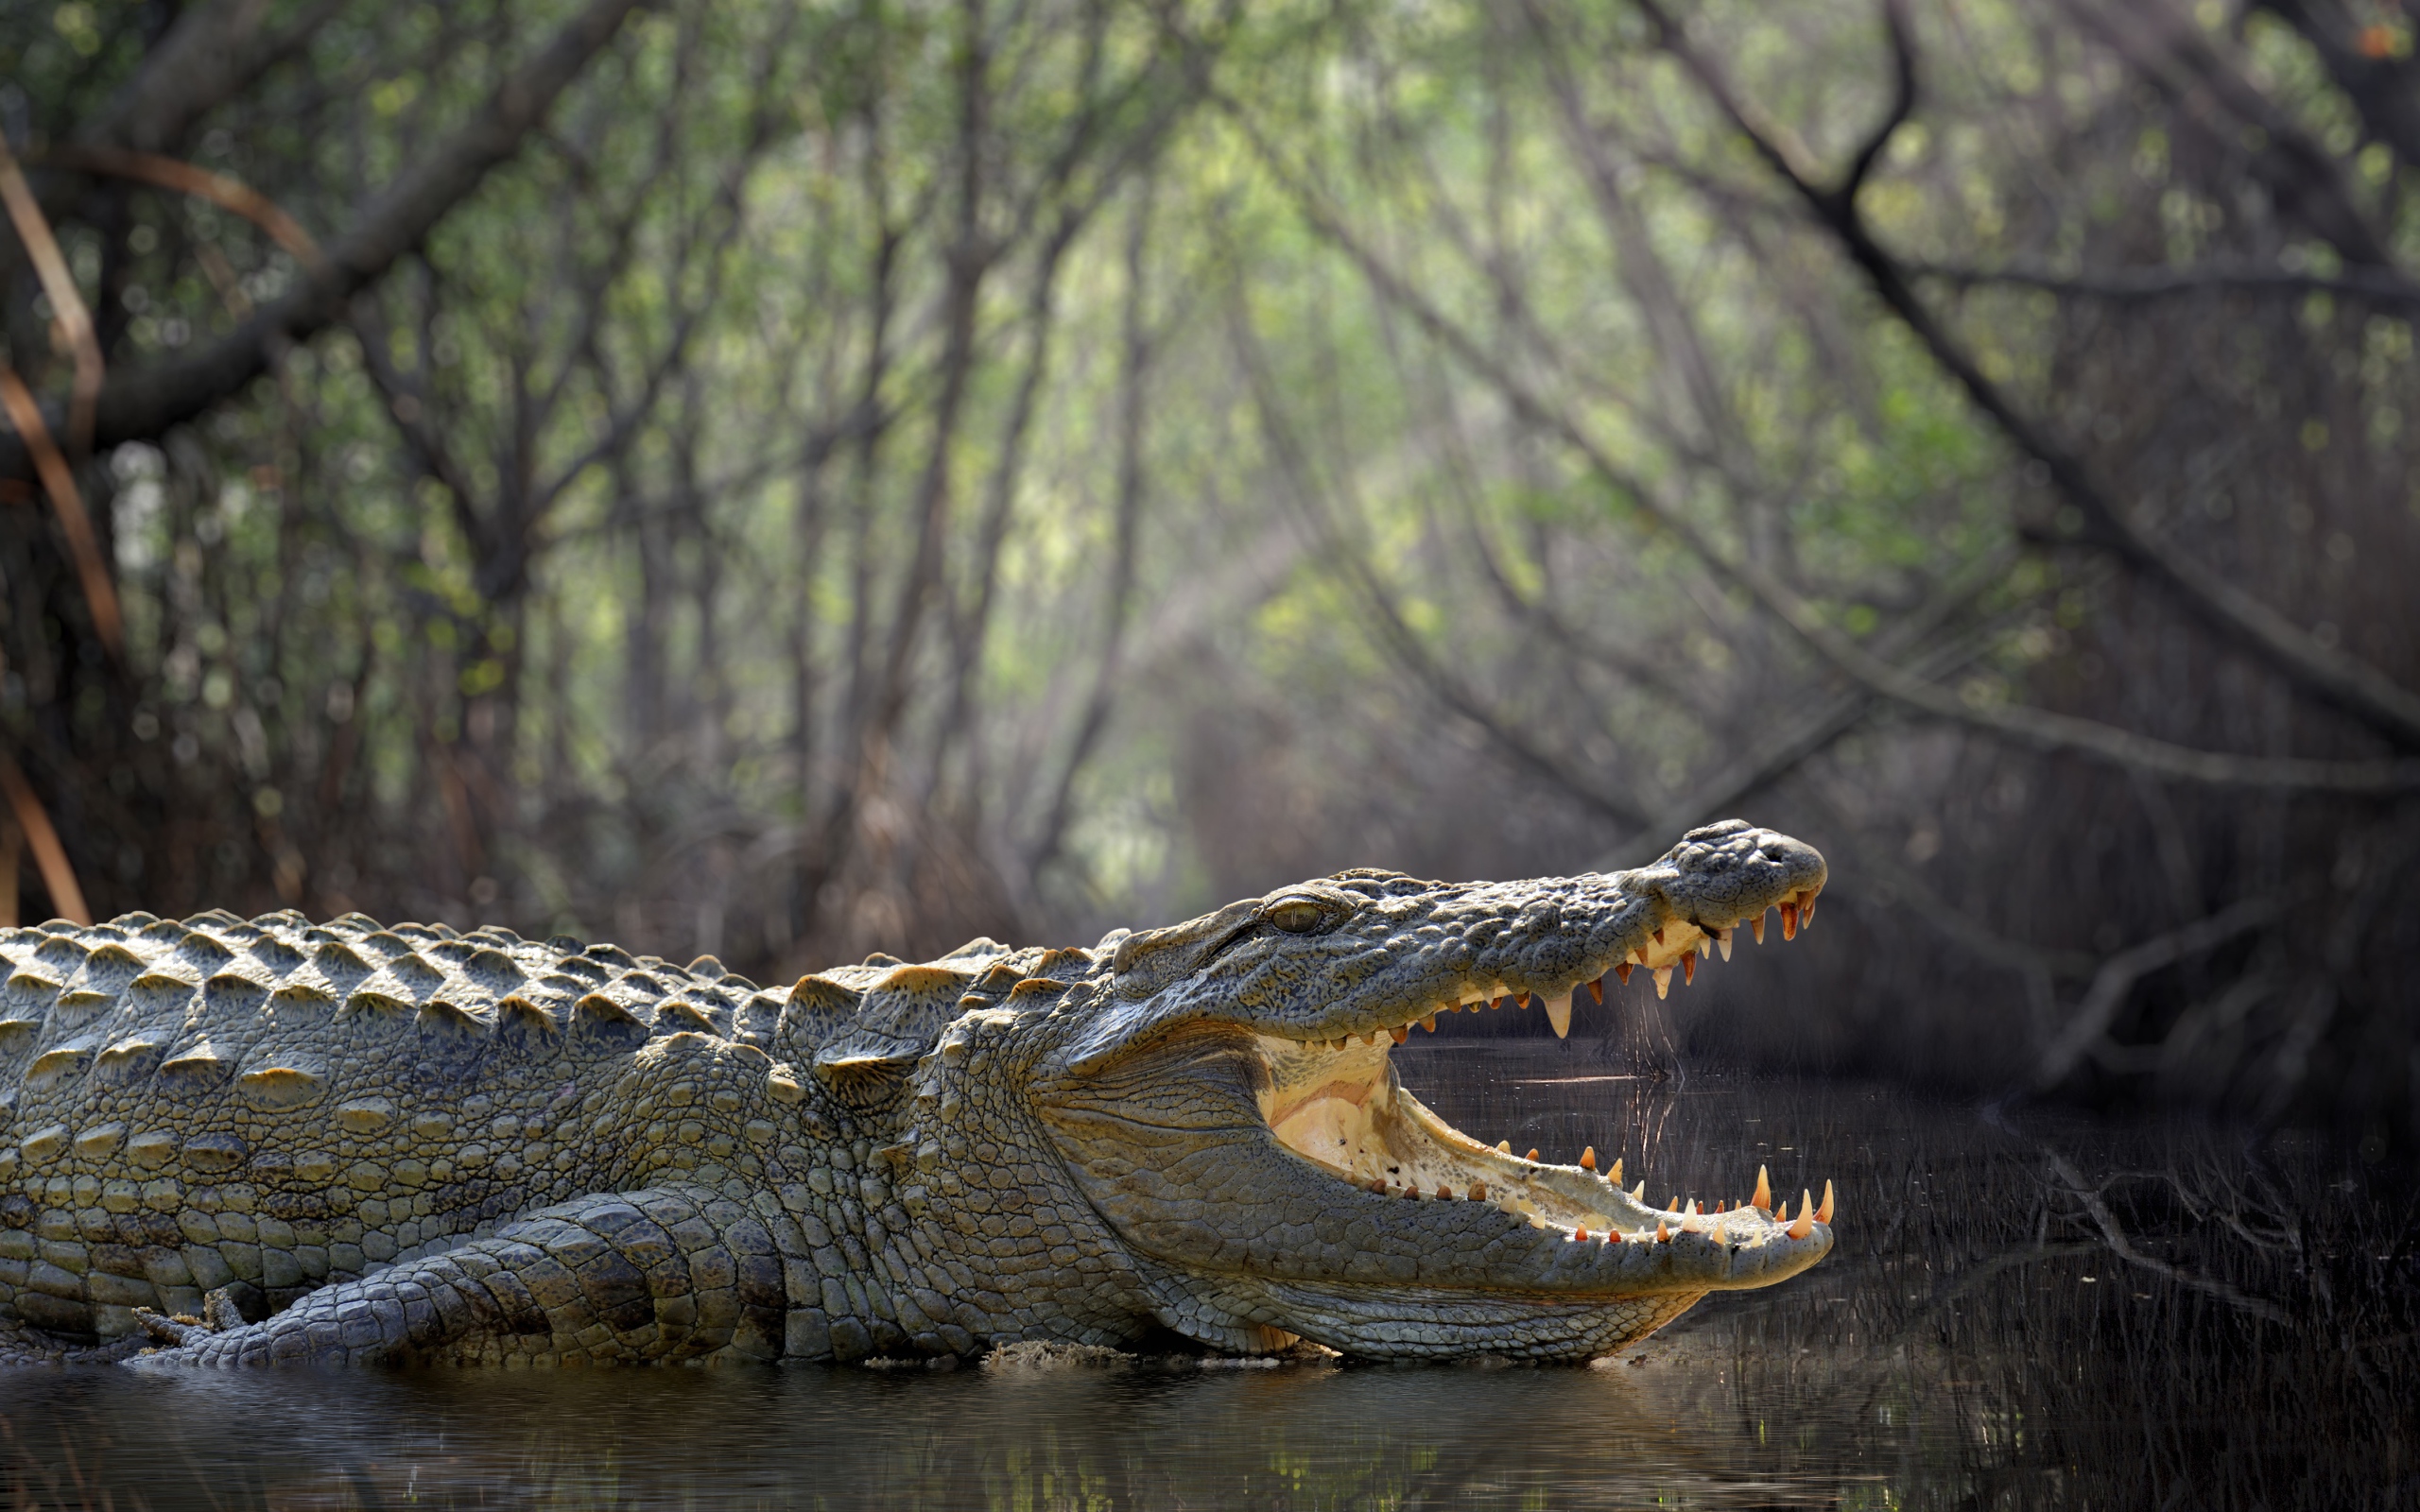 Large crocodile with open mouth in water